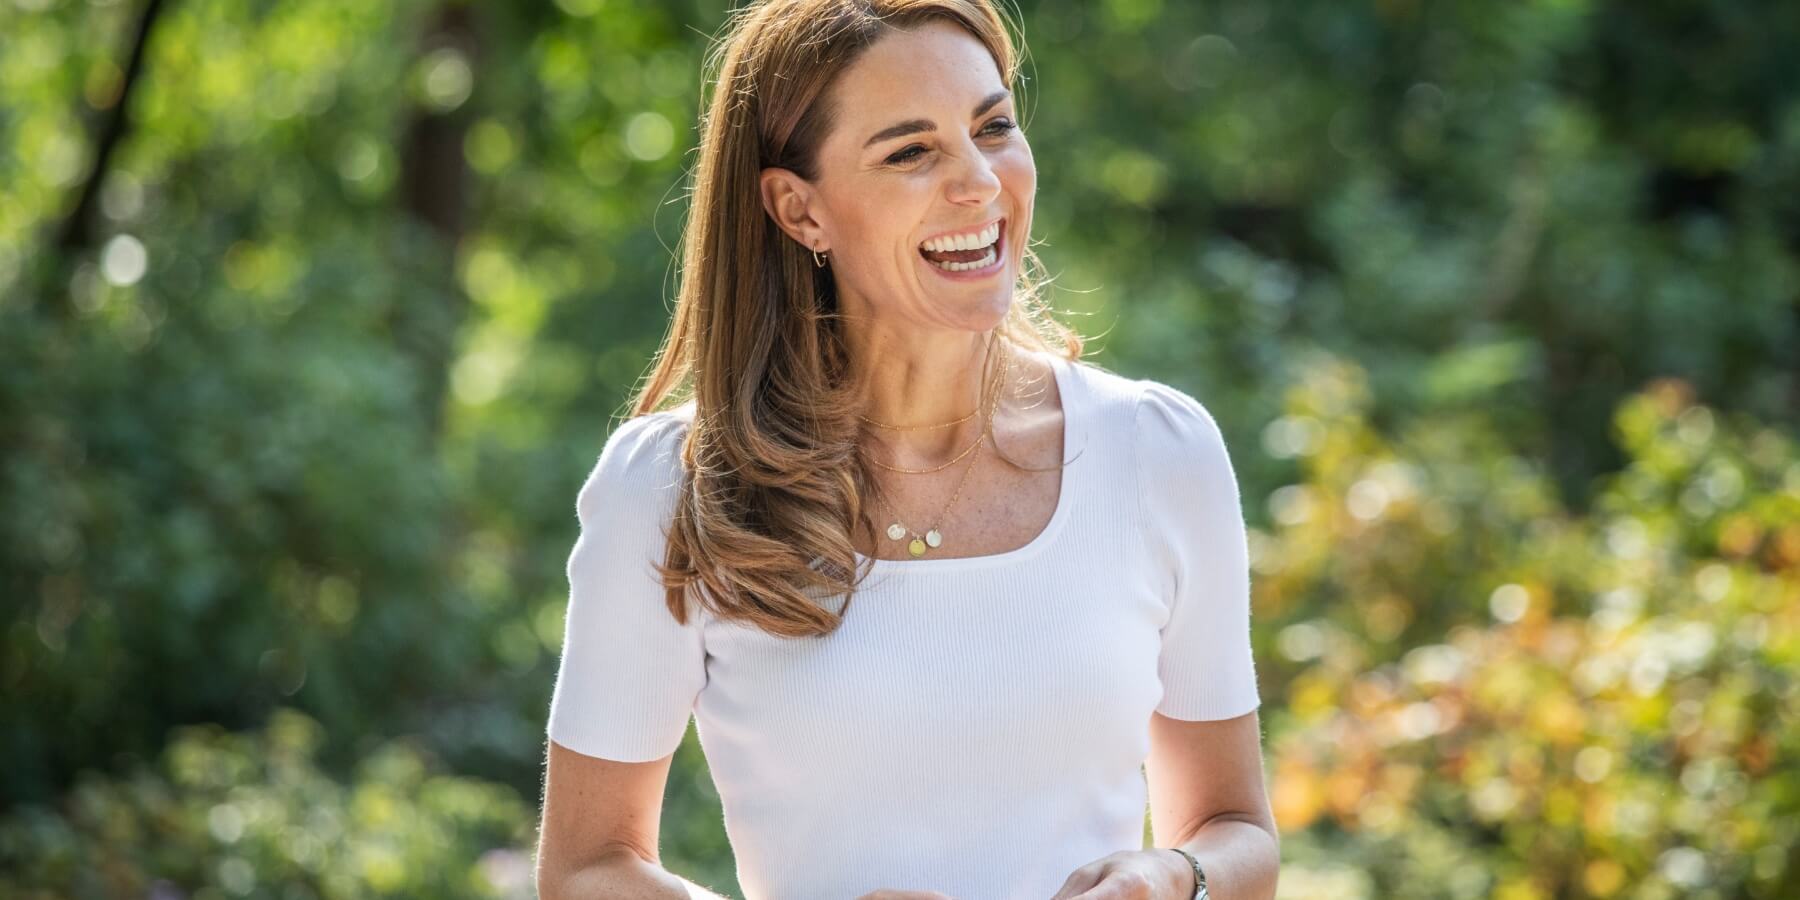 A royal insider claims Kate Middleton hid her planned surgery from those closest to her.